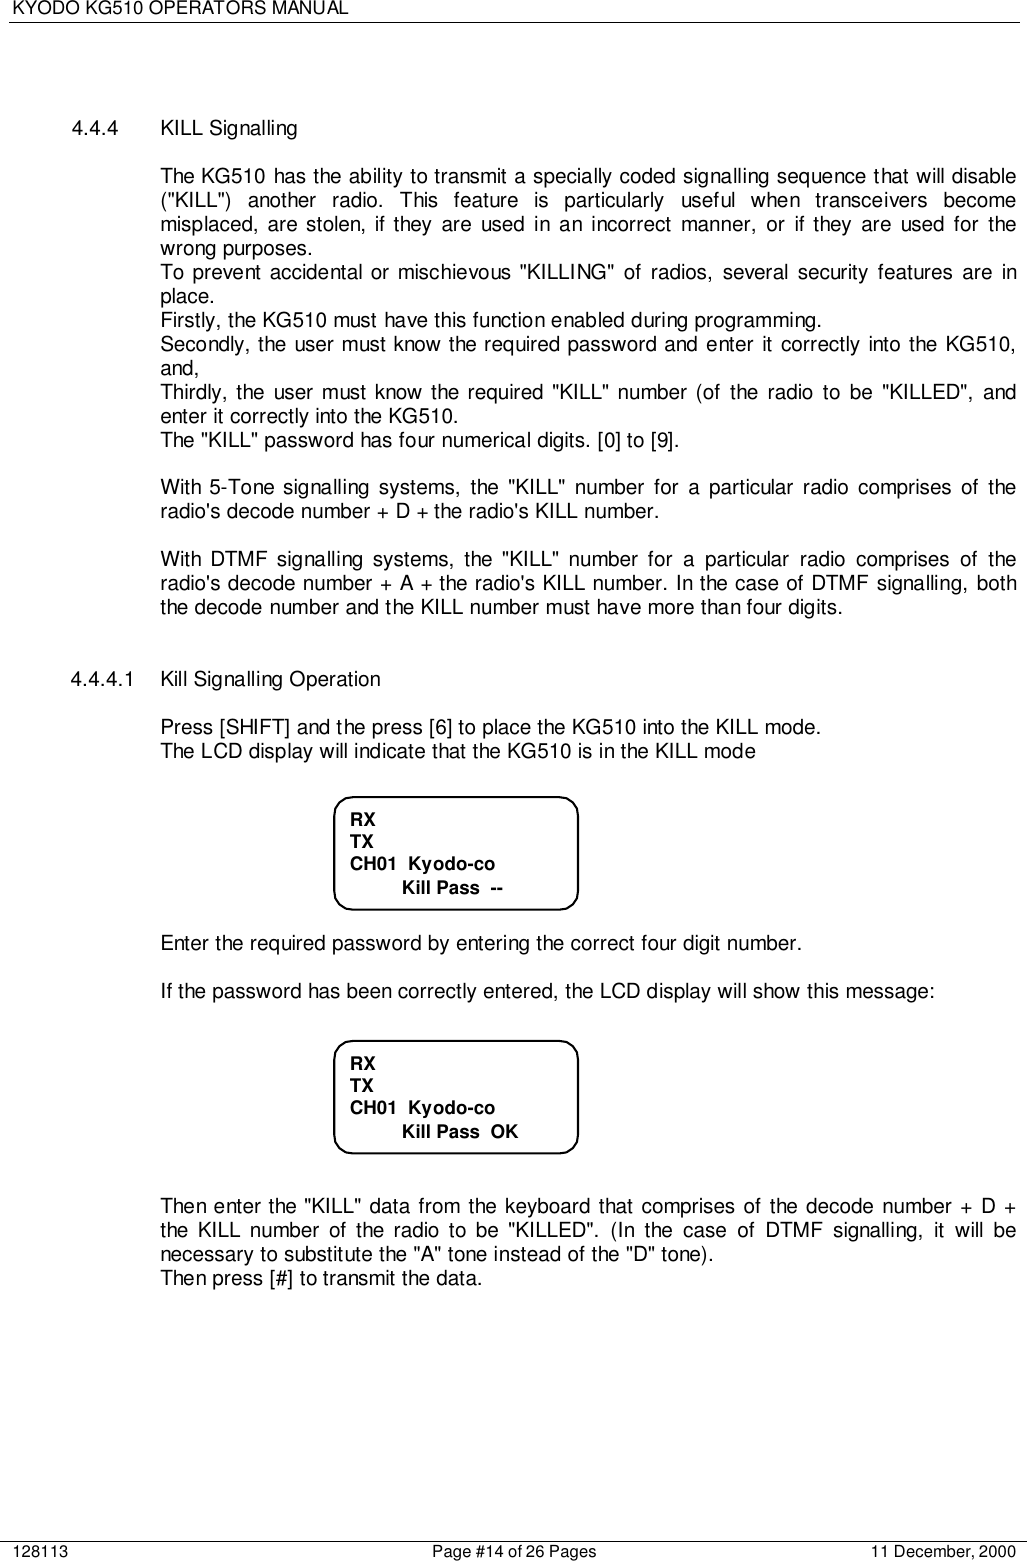 KYODO KG510 OPERATORS MANUAL128113 Page #14 of 26 Pages 11 December, 20004.4.4 KILL SignallingThe KG510 has the ability to transmit a specially coded signalling sequence that will disable(&quot;KILL&quot;) another radio. This feature is particularly useful when transceivers becomemisplaced, are stolen, if they are used in an incorrect manner, or if they are used for thewrong purposes.To prevent accidental or mischievous &quot;KILLING&quot; of radios, several security features are inplace.Firstly, the KG510 must have this function enabled during programming.Secondly, the user must know the required password and enter it correctly into the KG510,and,Thirdly, the user must know the required &quot;KILL&quot; number (of the radio to be &quot;KILLED&quot;, andenter it correctly into the KG510.The &quot;KILL&quot; password has four numerical digits. [0] to [9].With 5-Tone signalling systems, the &quot;KILL&quot; number for a particular radio comprises of theradio&apos;s decode number + D + the radio&apos;s KILL number.With DTMF signalling systems, the &quot;KILL&quot; number for a particular radio comprises of theradio&apos;s decode number + A + the radio&apos;s KILL number. In the case of DTMF signalling, boththe decode number and the KILL number must have more than four digits.4.4.4.1  Kill Signalling OperationPress [SHIFT] and the press [6] to place the KG510 into the KILL mode.The LCD display will indicate that the KG510 is in the KILL modeEnter the required password by entering the correct four digit number.If the password has been correctly entered, the LCD display will show this message:Then enter the &quot;KILL&quot; data from the keyboard that comprises of the decode number + D +the KILL number of the radio to be &quot;KILLED&quot;. (In the case of DTMF signalling, it will benecessary to substitute the &quot;A&quot; tone instead of the &quot;D&quot; tone).Then press [#] to transmit the data.RXTXCH01  Kyodo-co          Kill Pass  OKRXTXCH01  Kyodo-co          Kill Pass  --